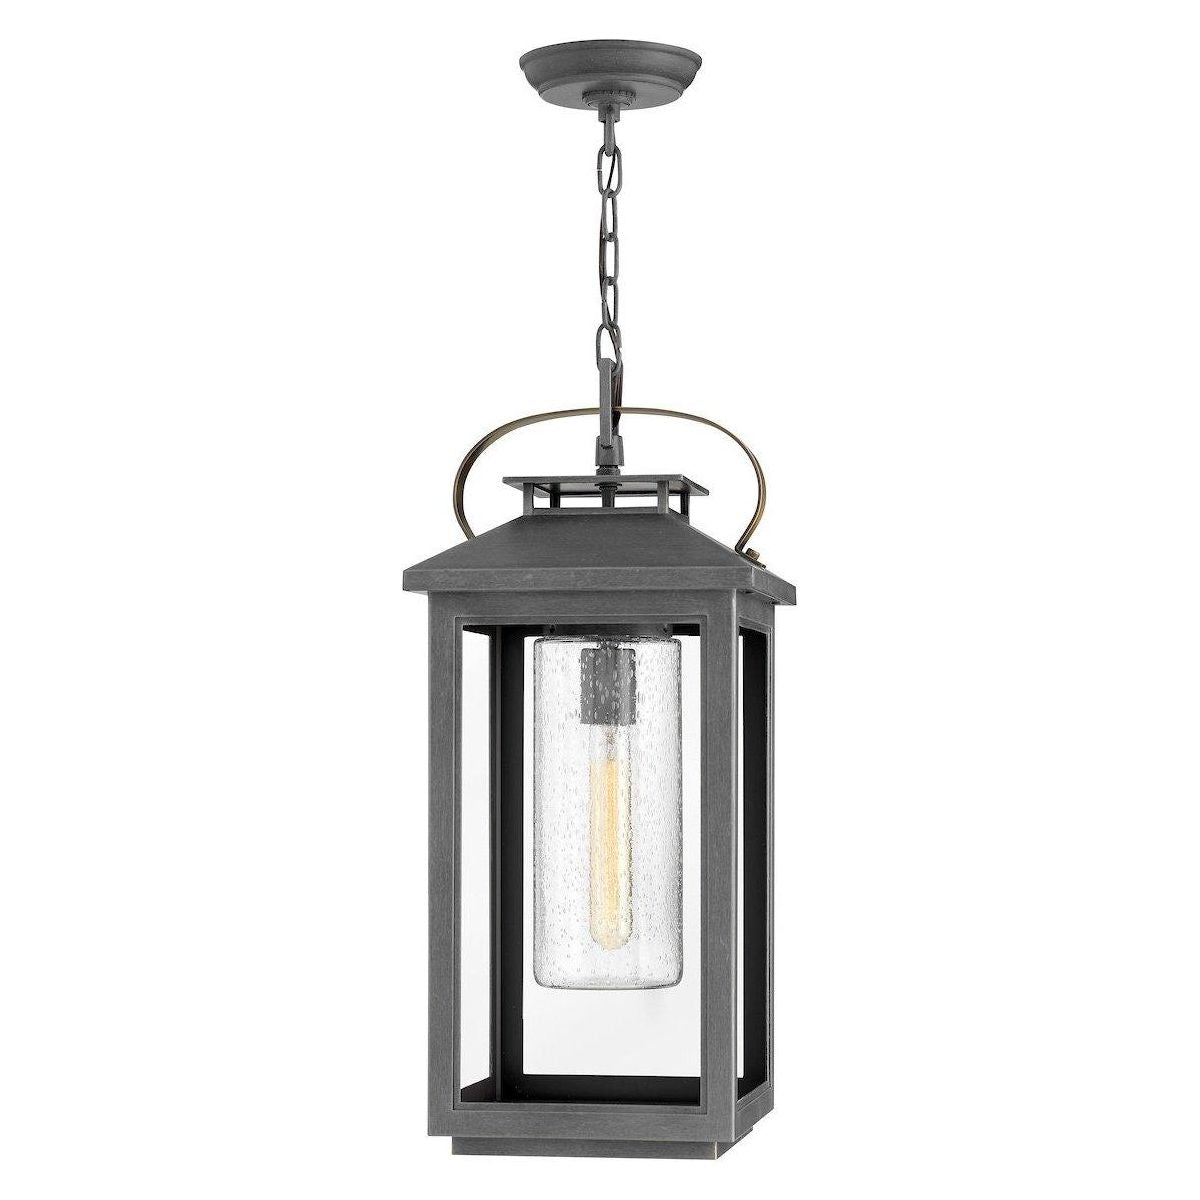 Hinkley - Atwater Outdoor Pendant - Lights Canada